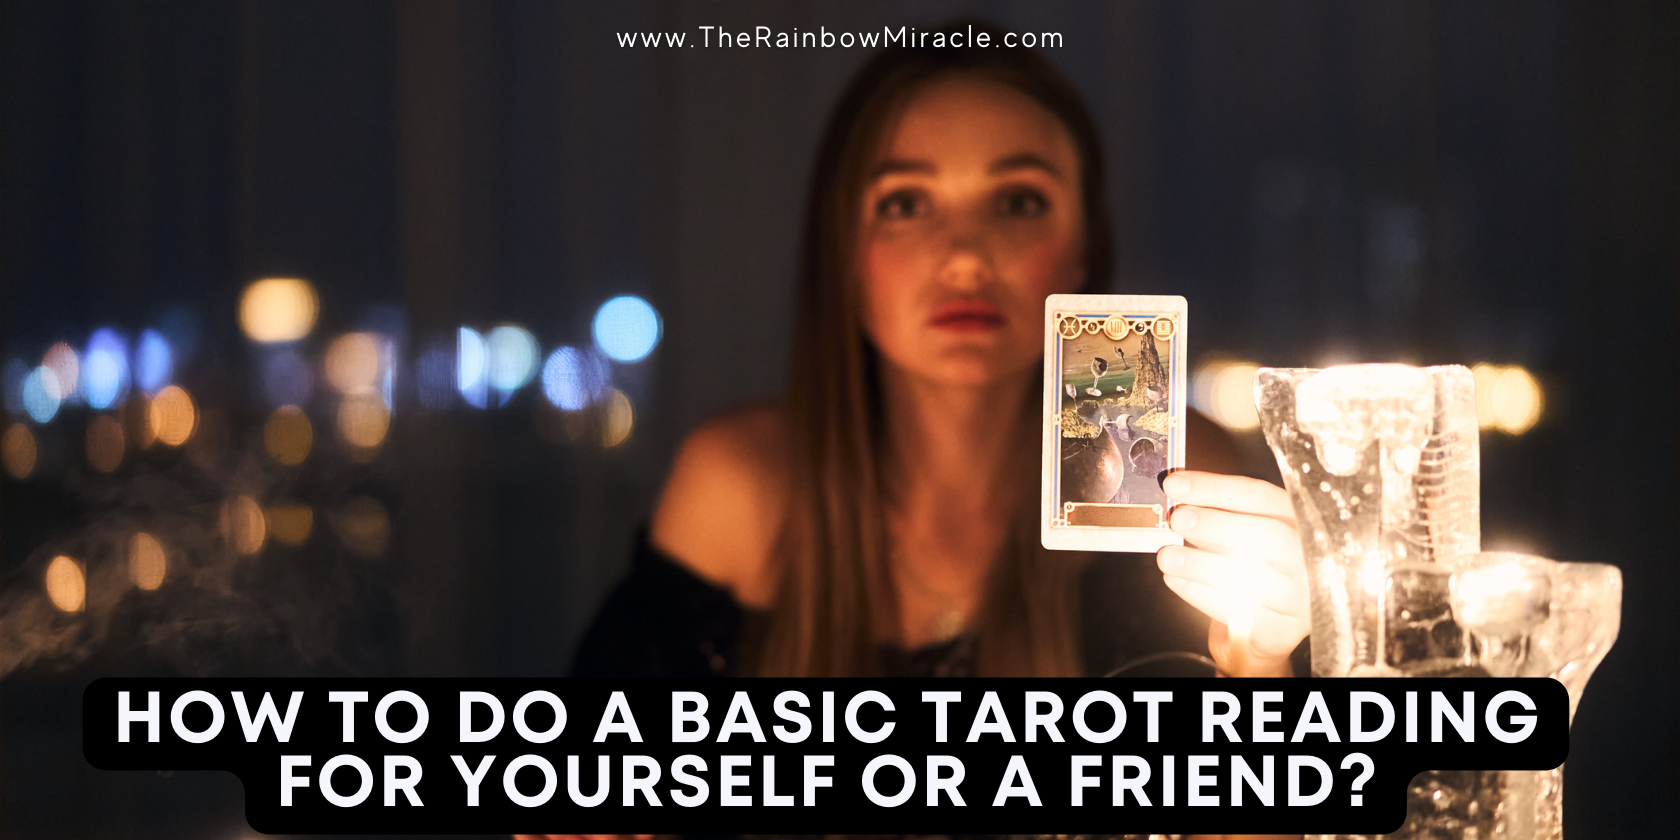  tarot reading for yourself or a friend